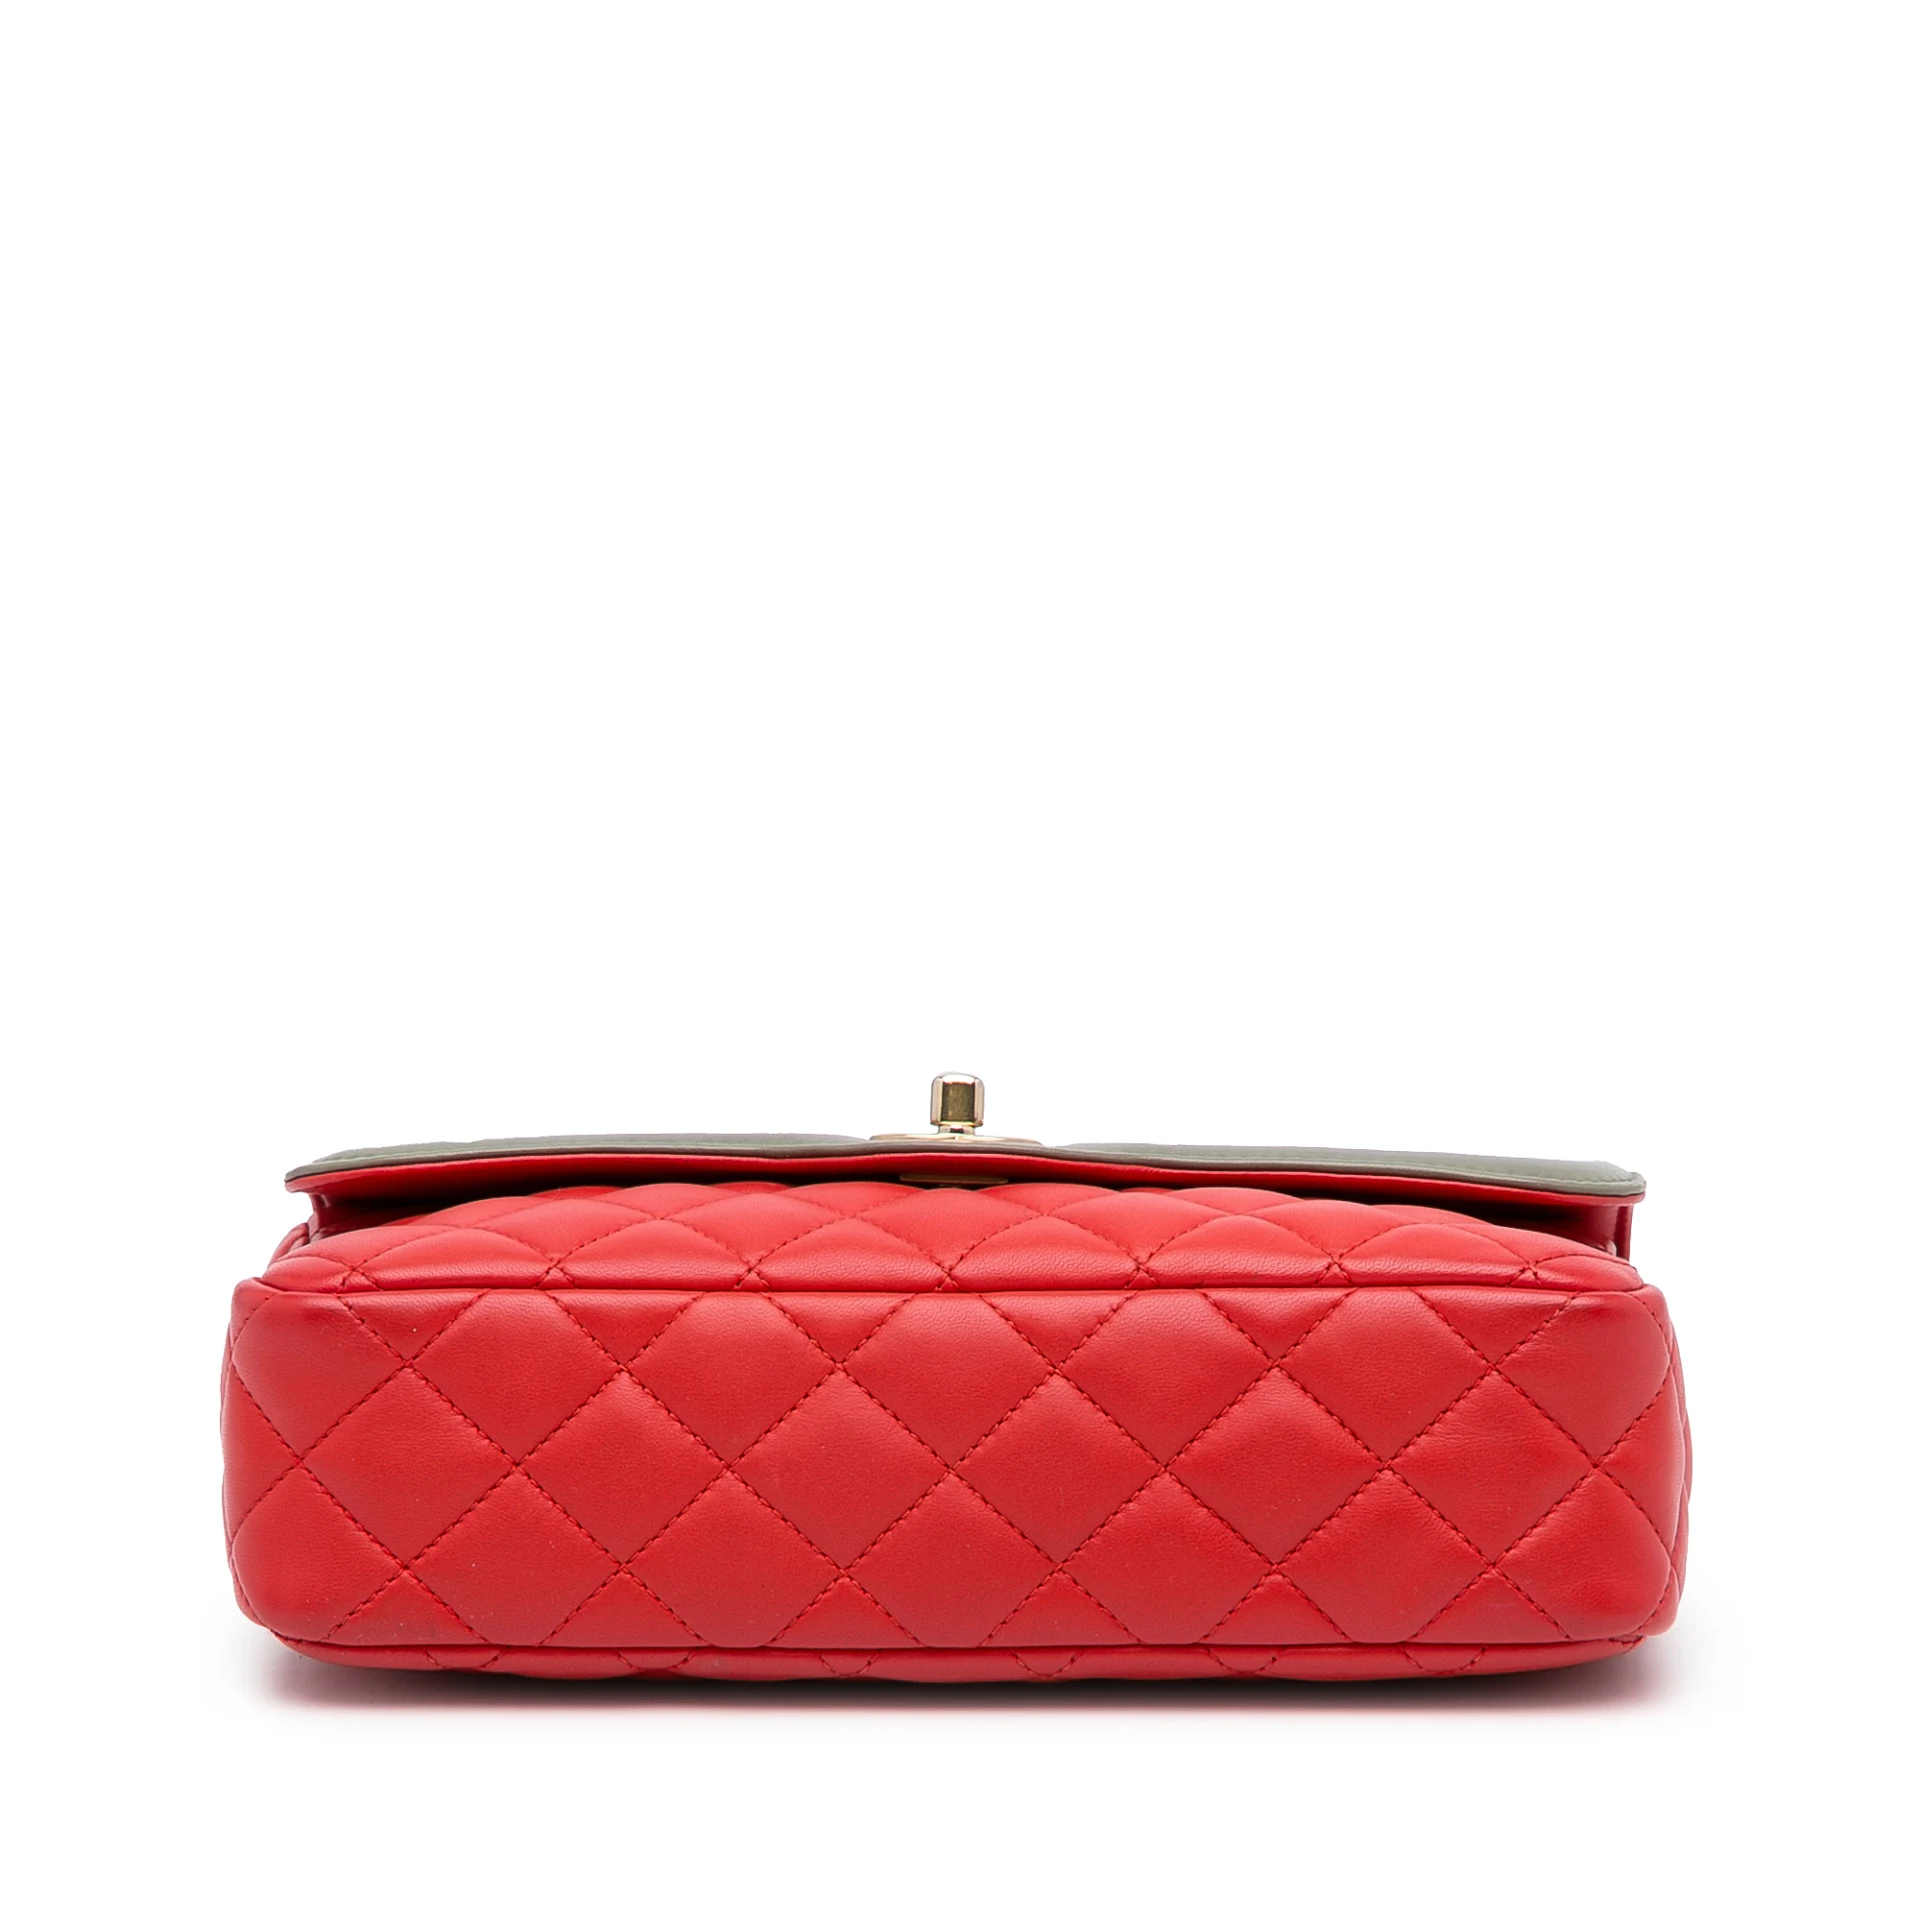 Chanel Two-tone Day Flap Bag